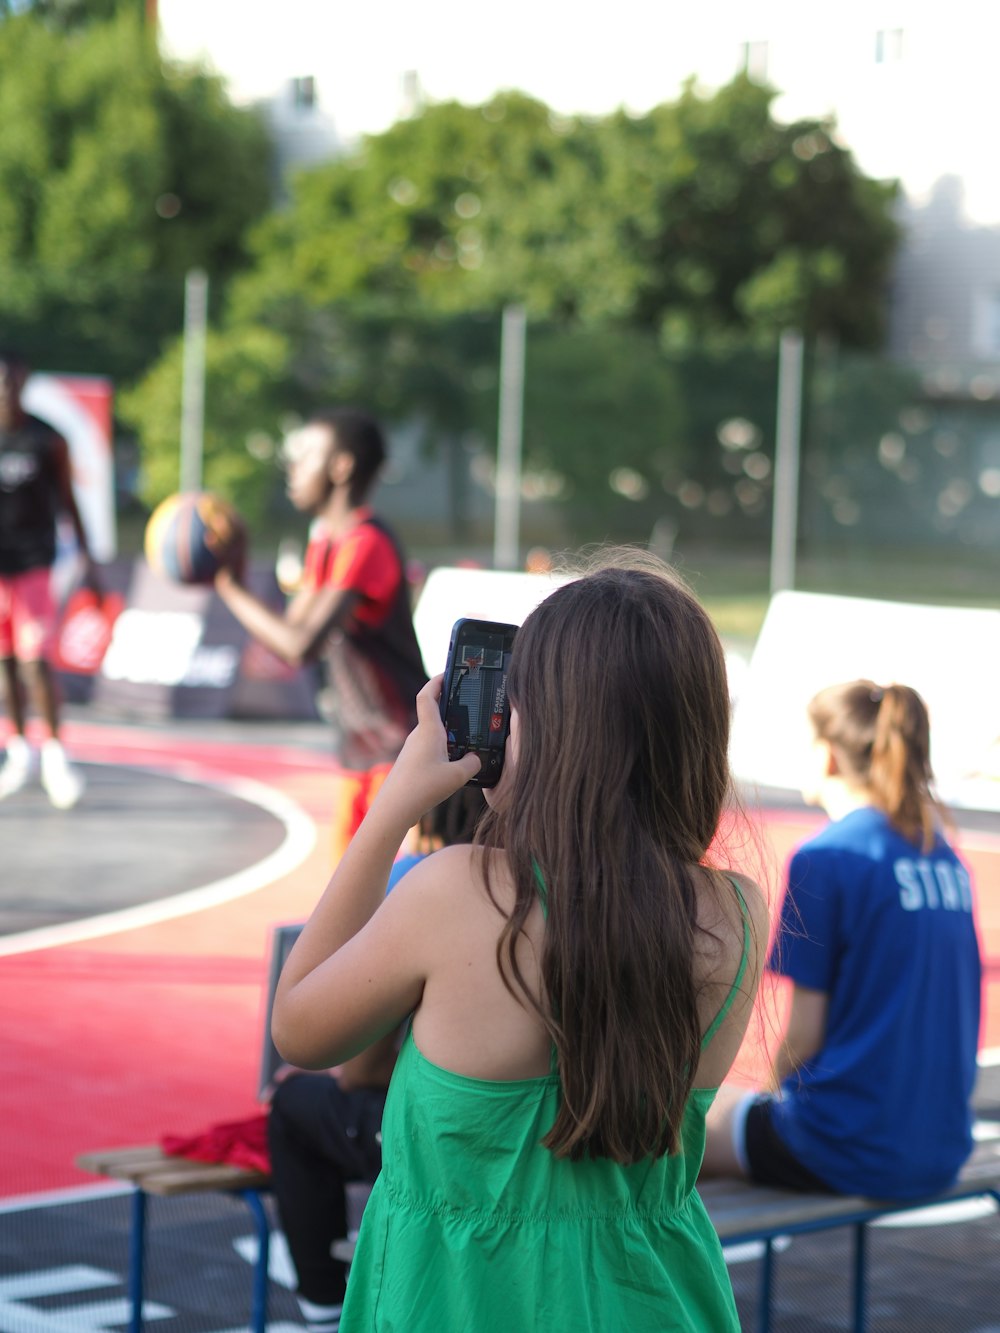 a woman taking a picture of a girl in a green dress